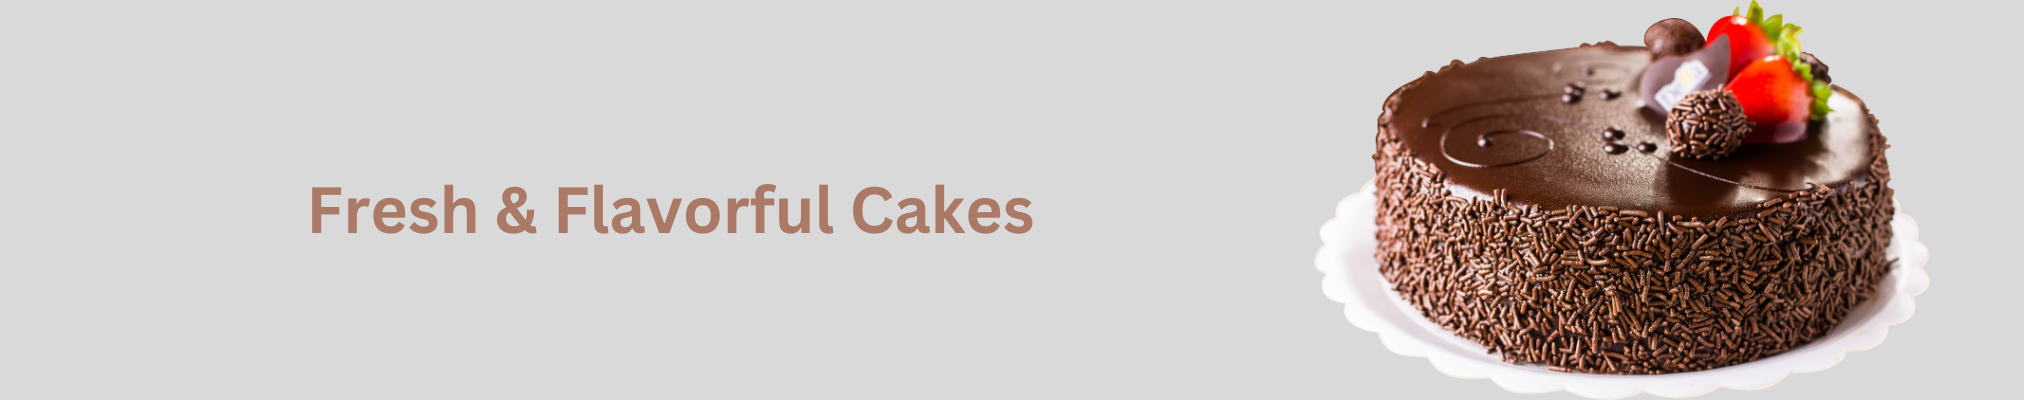 Cakes Banner